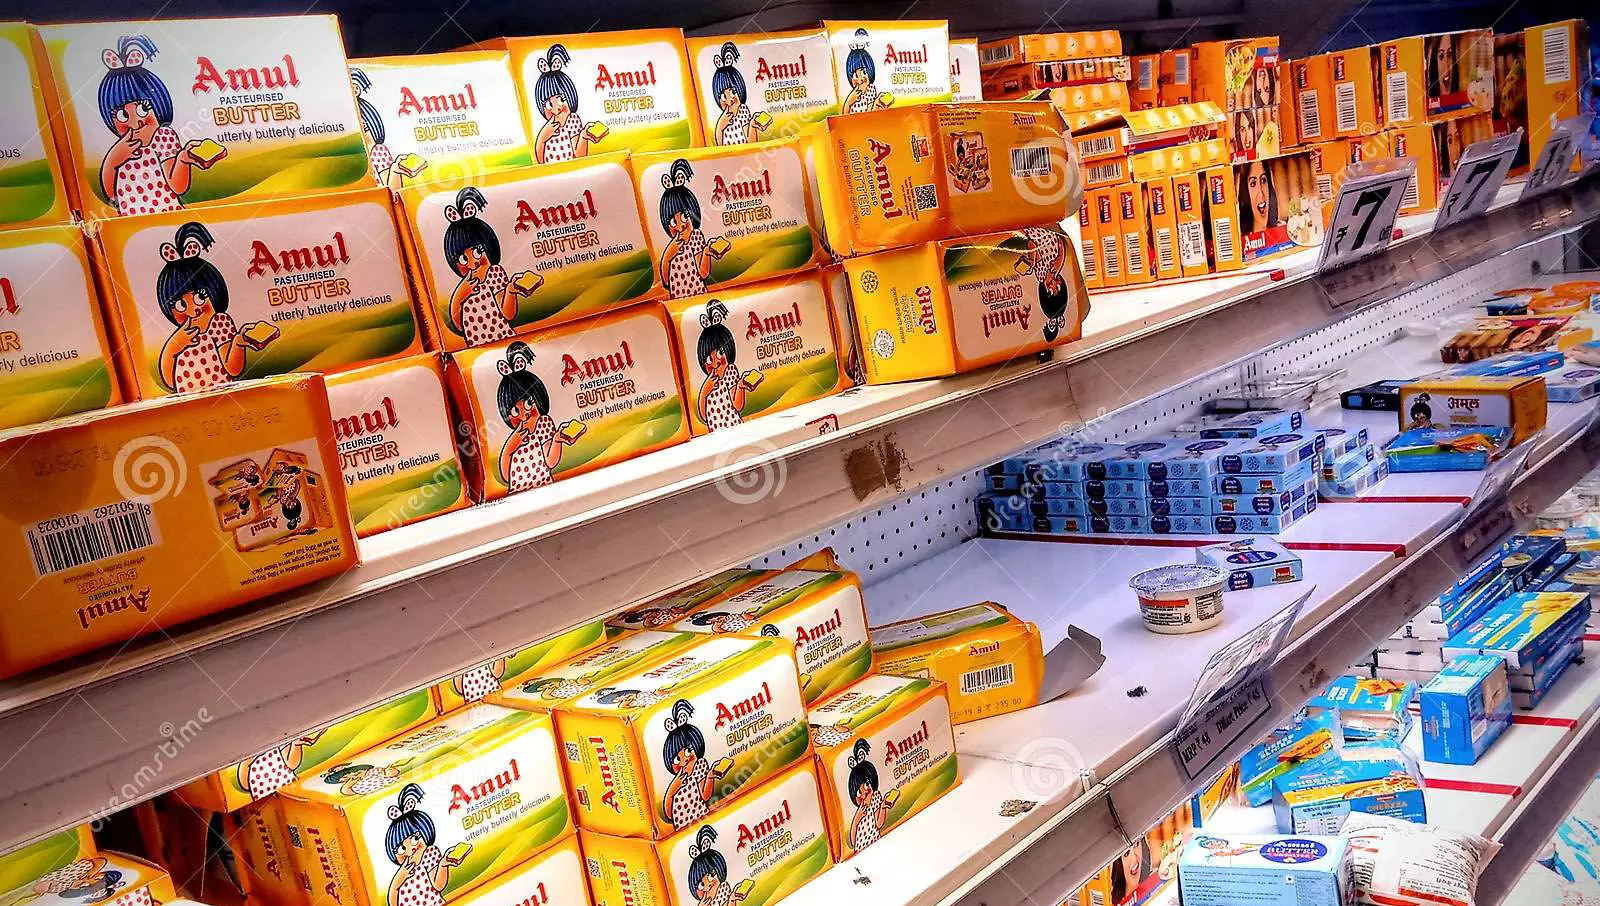 Amul is not entering Karnataka: BJP, countering the Congress charge